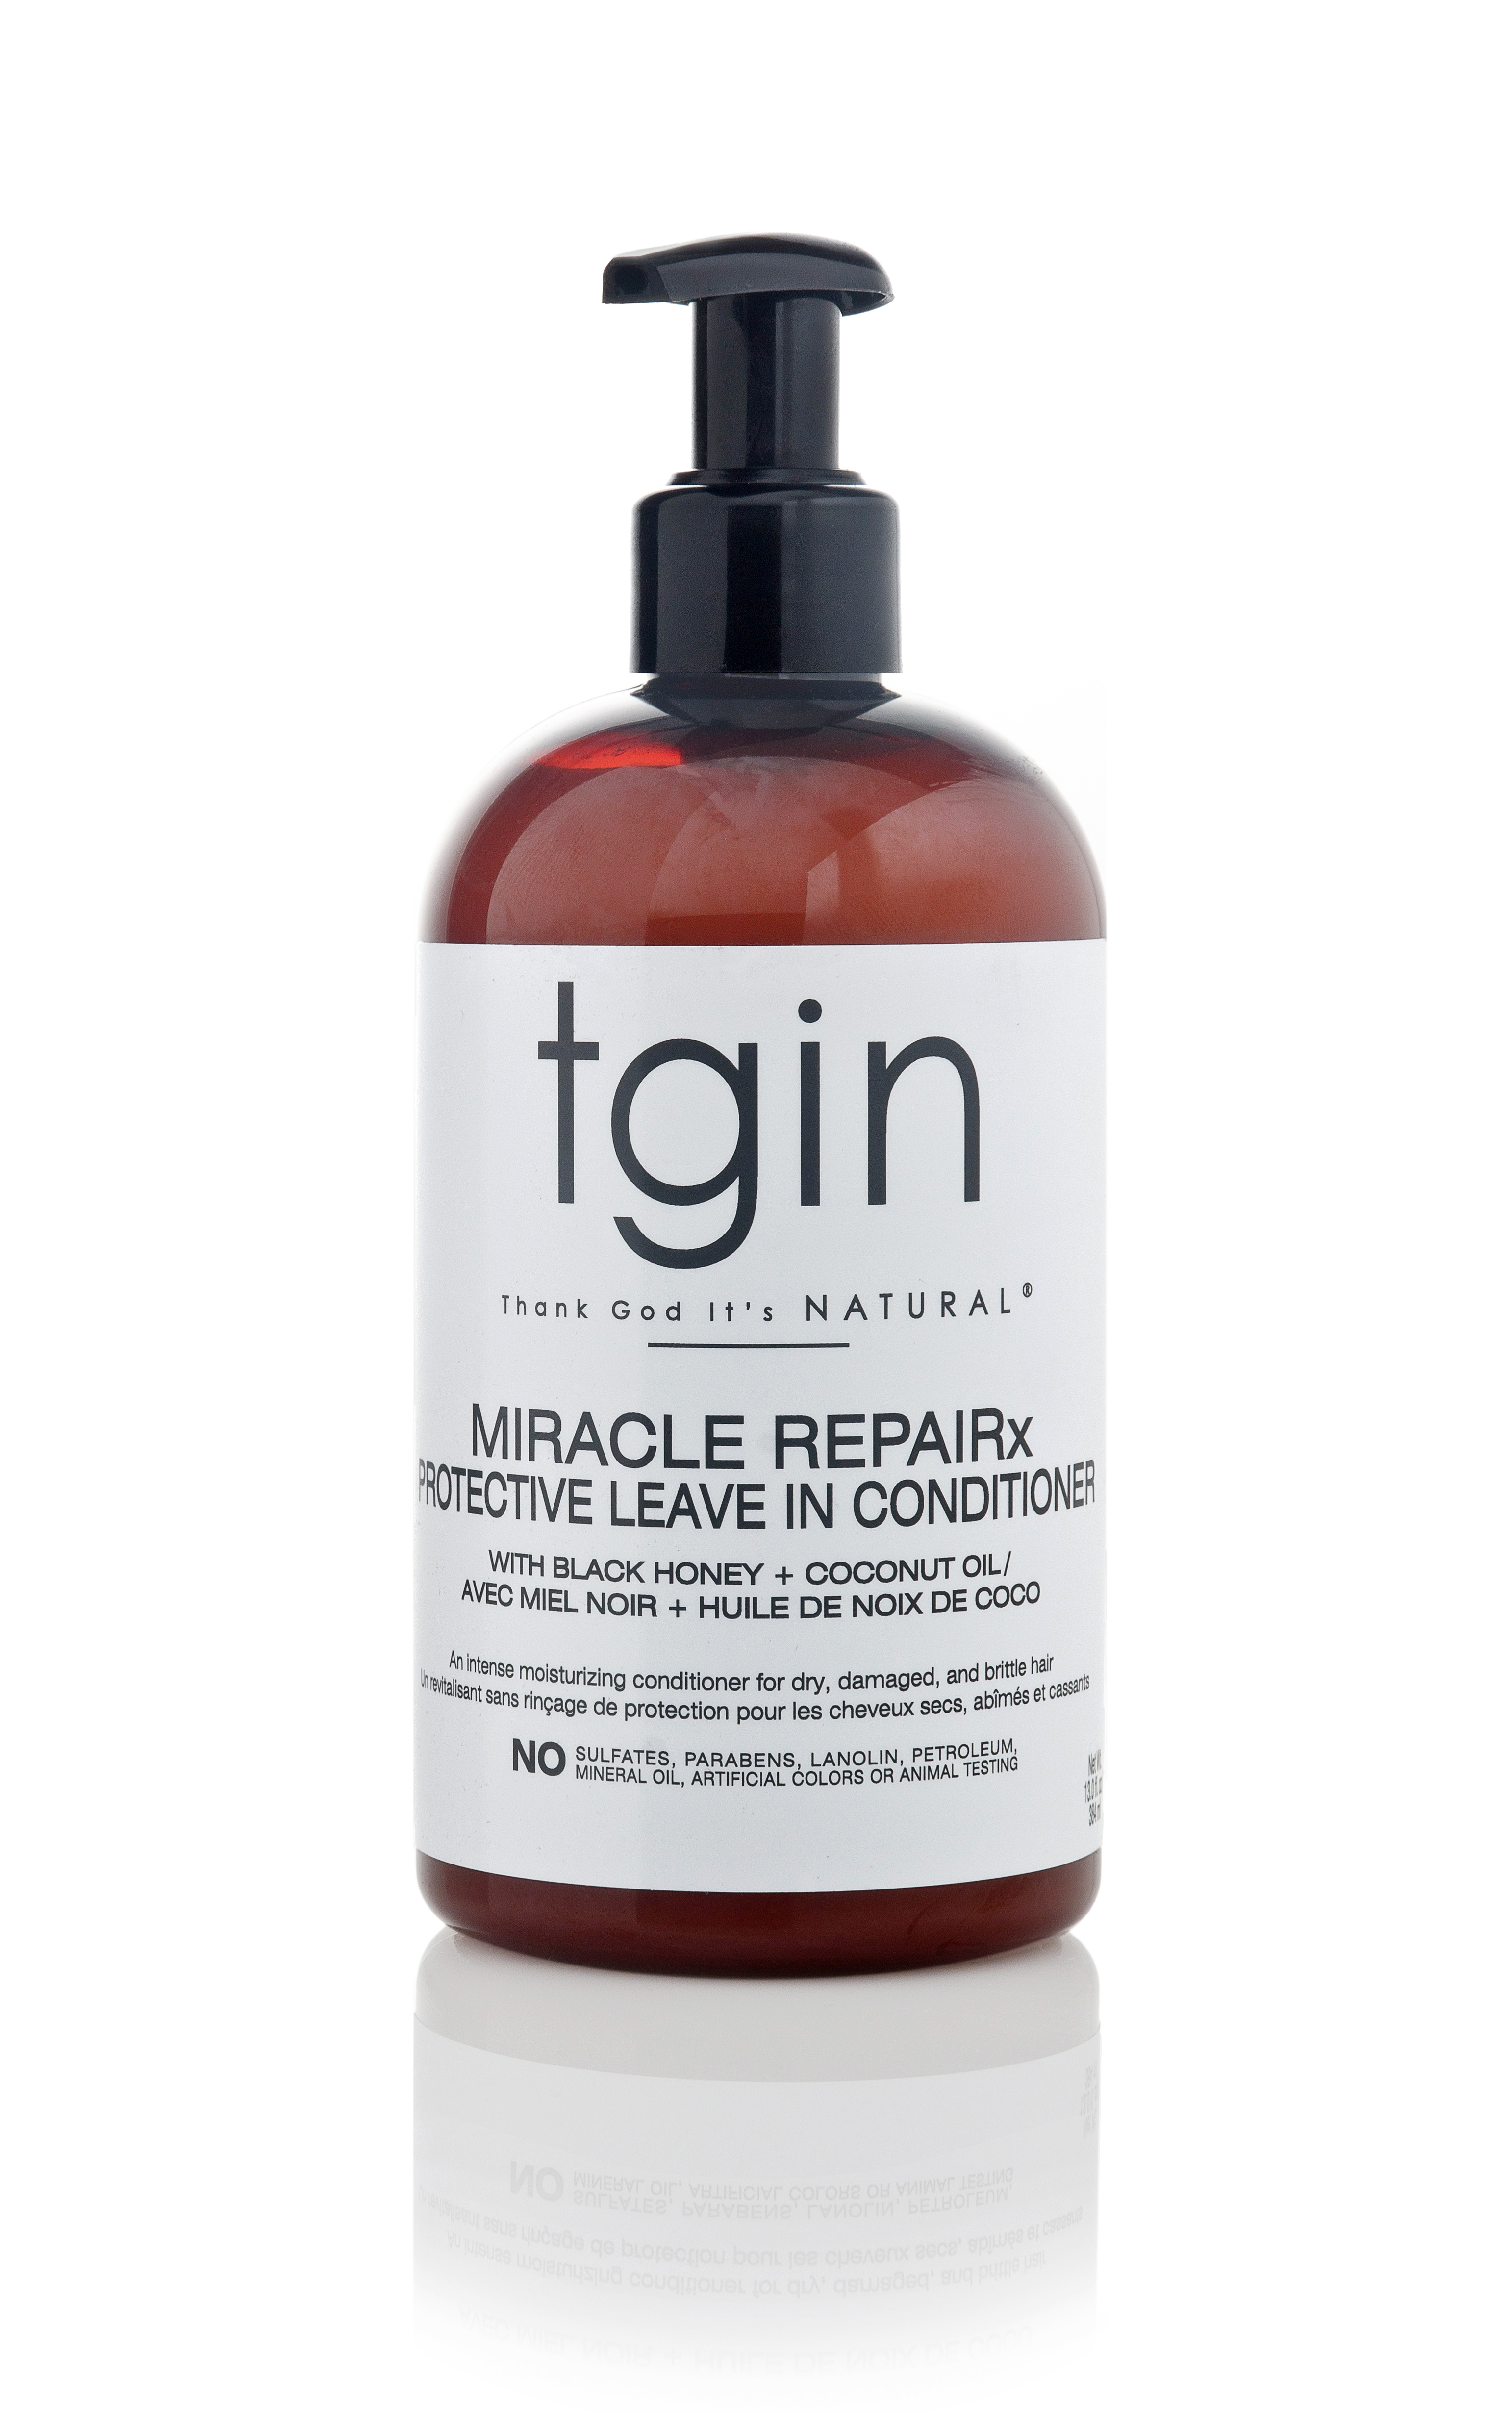 Thank God It's Natural TGIN Products